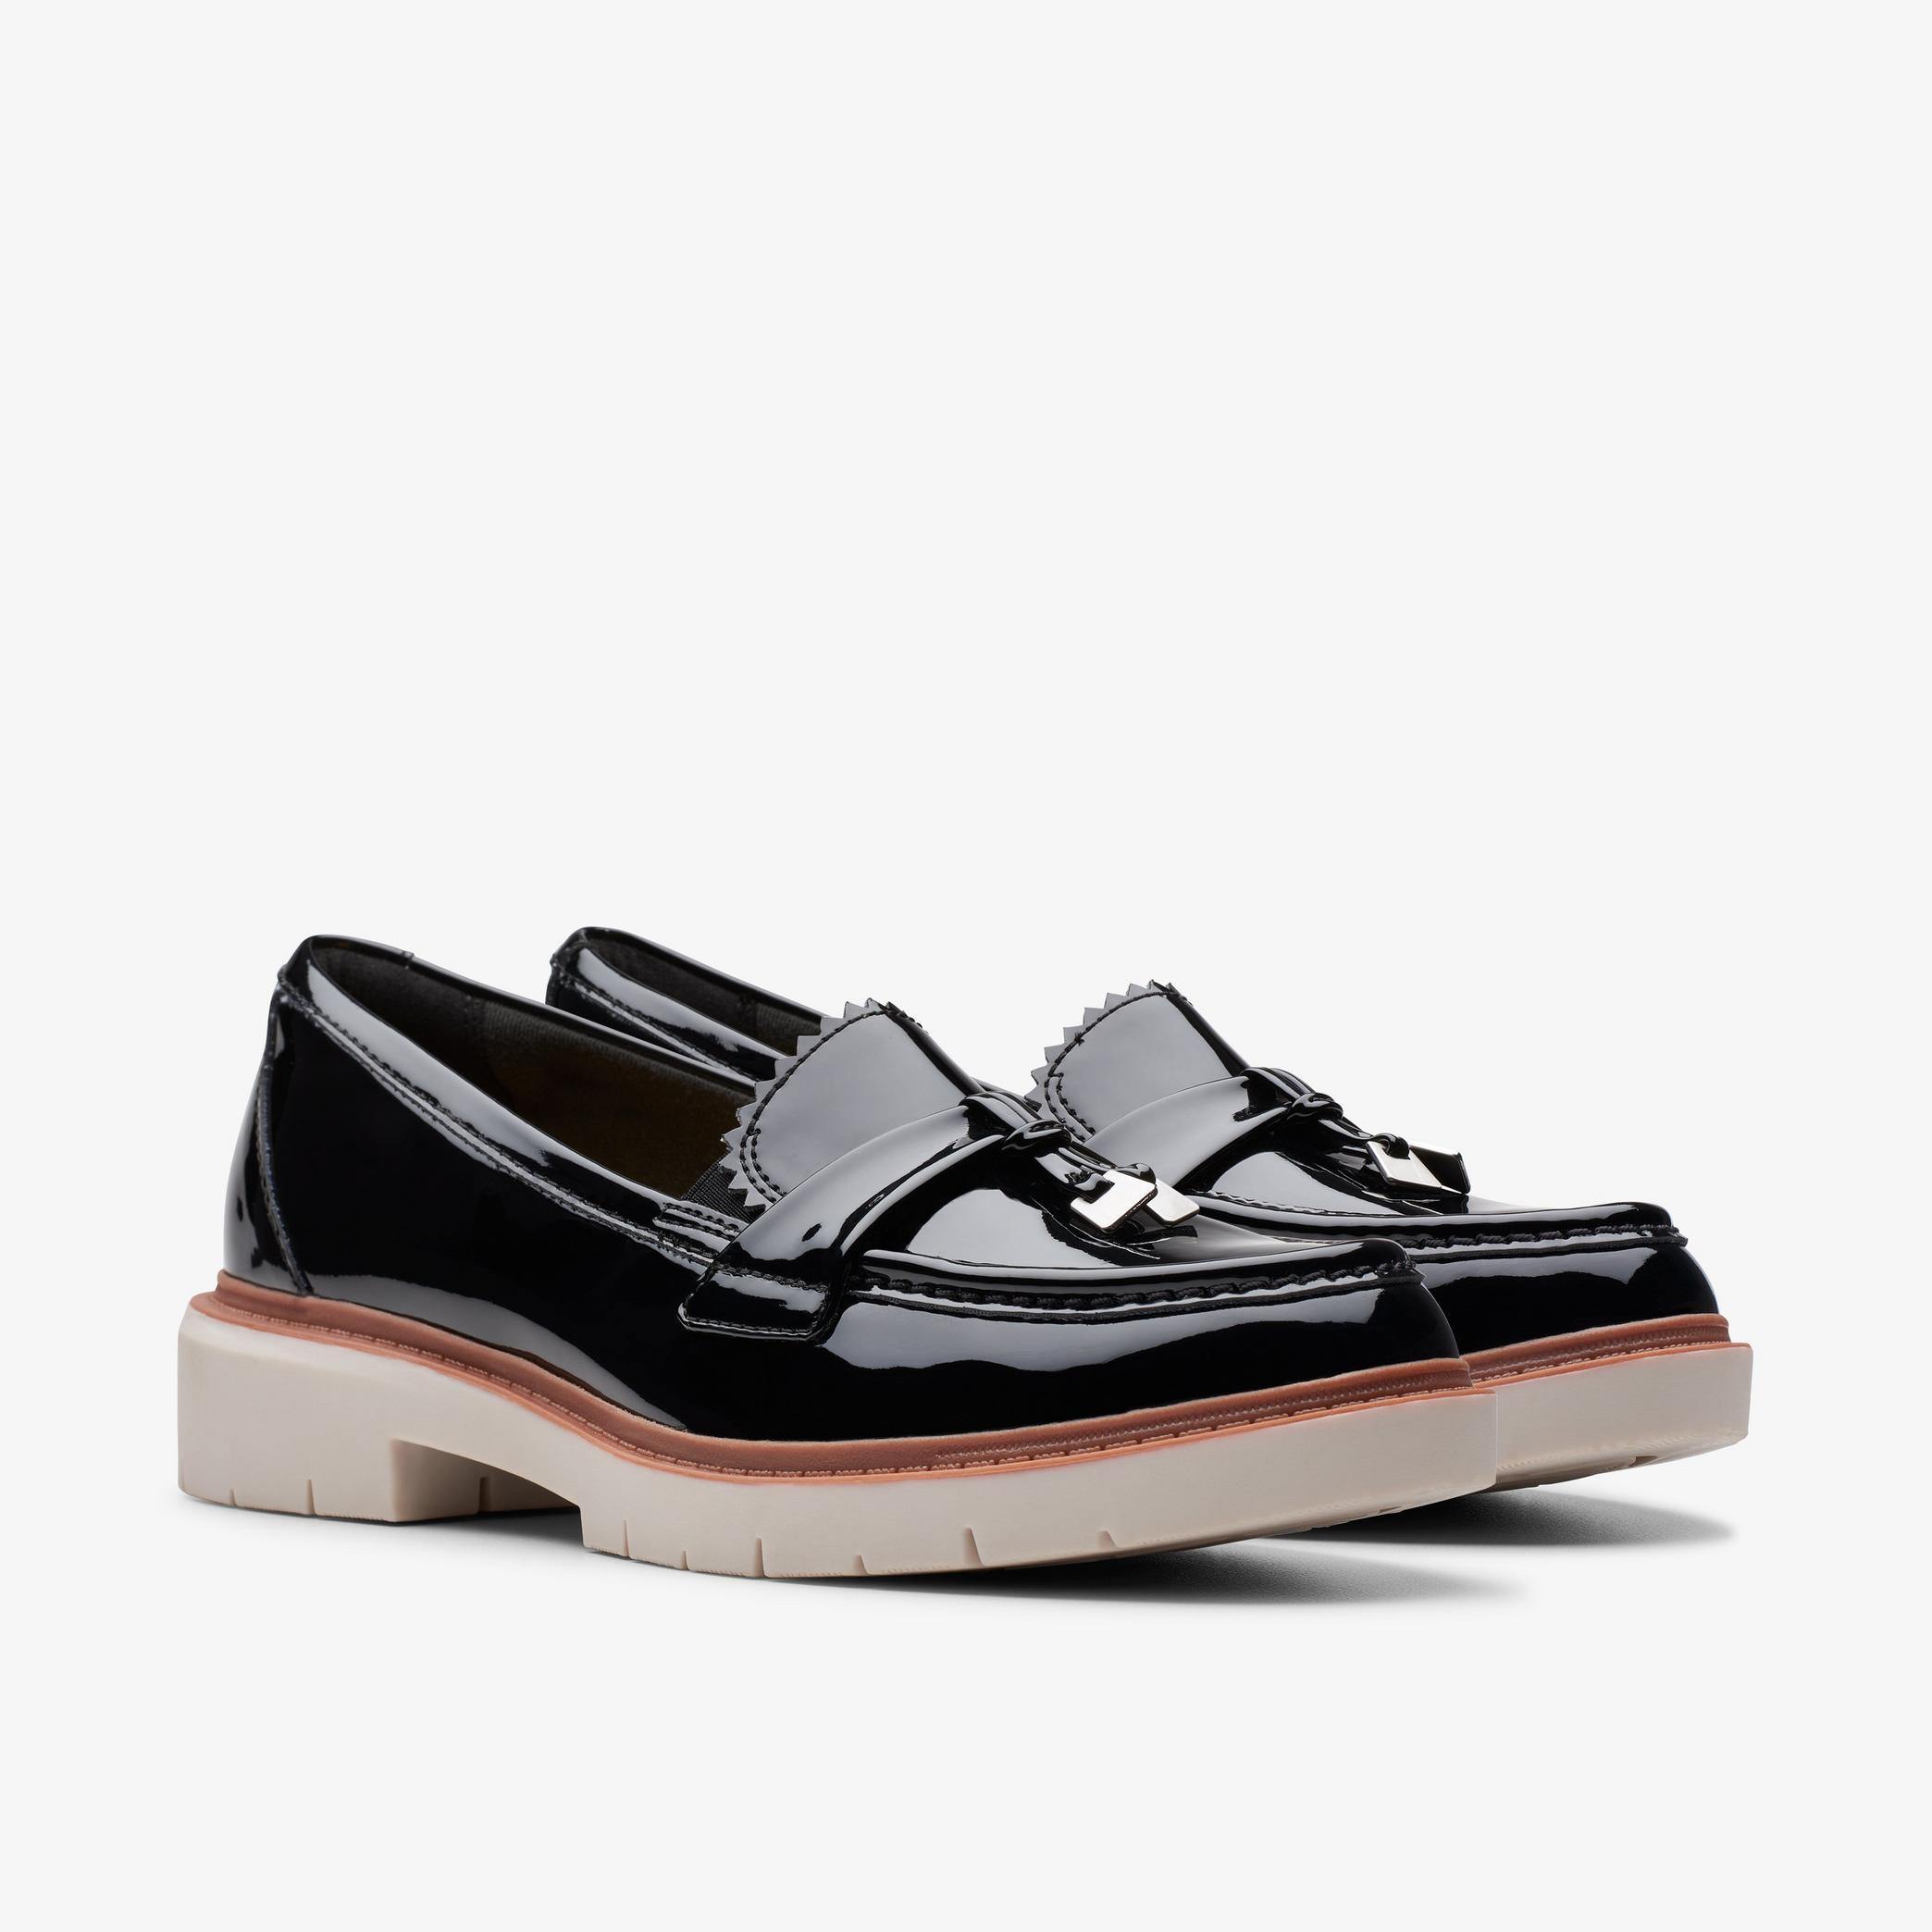 Westlynn Bella Black Patent Loafers, view 4 of 6